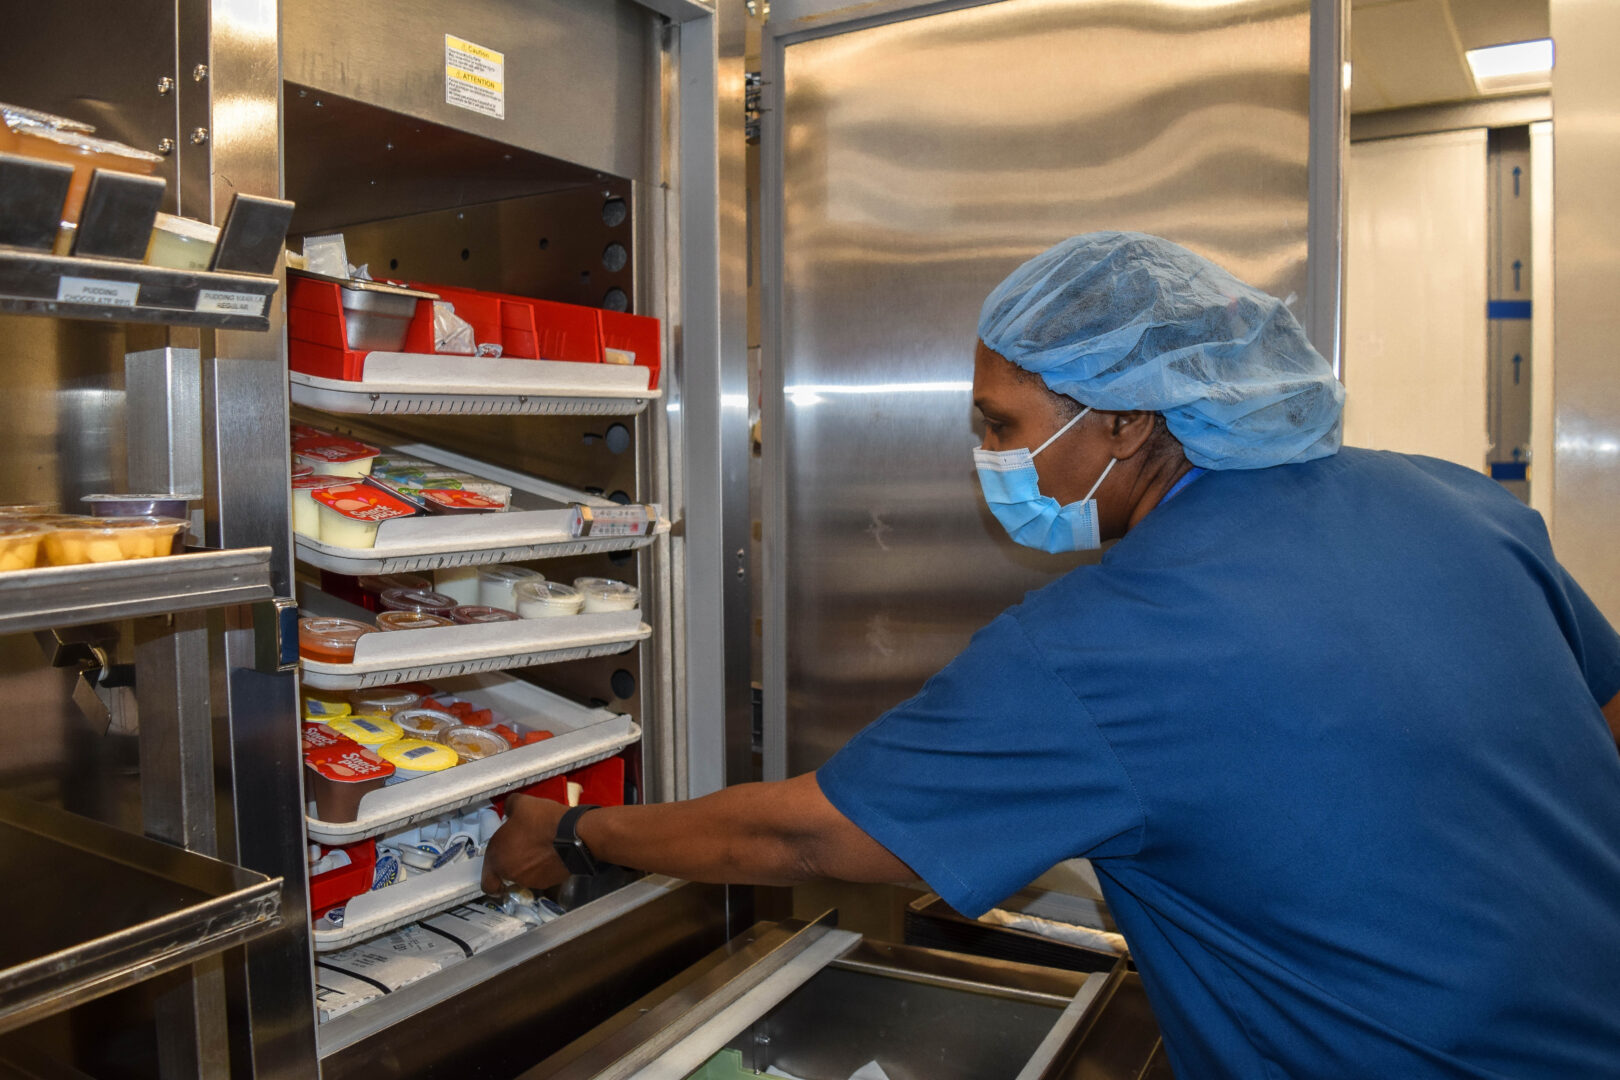 Photo of Karen Julien, a food service assistant at oak valley health, she is shown taking food compartments out of the fridge, she is wearing a face and hair mask in a blue gown